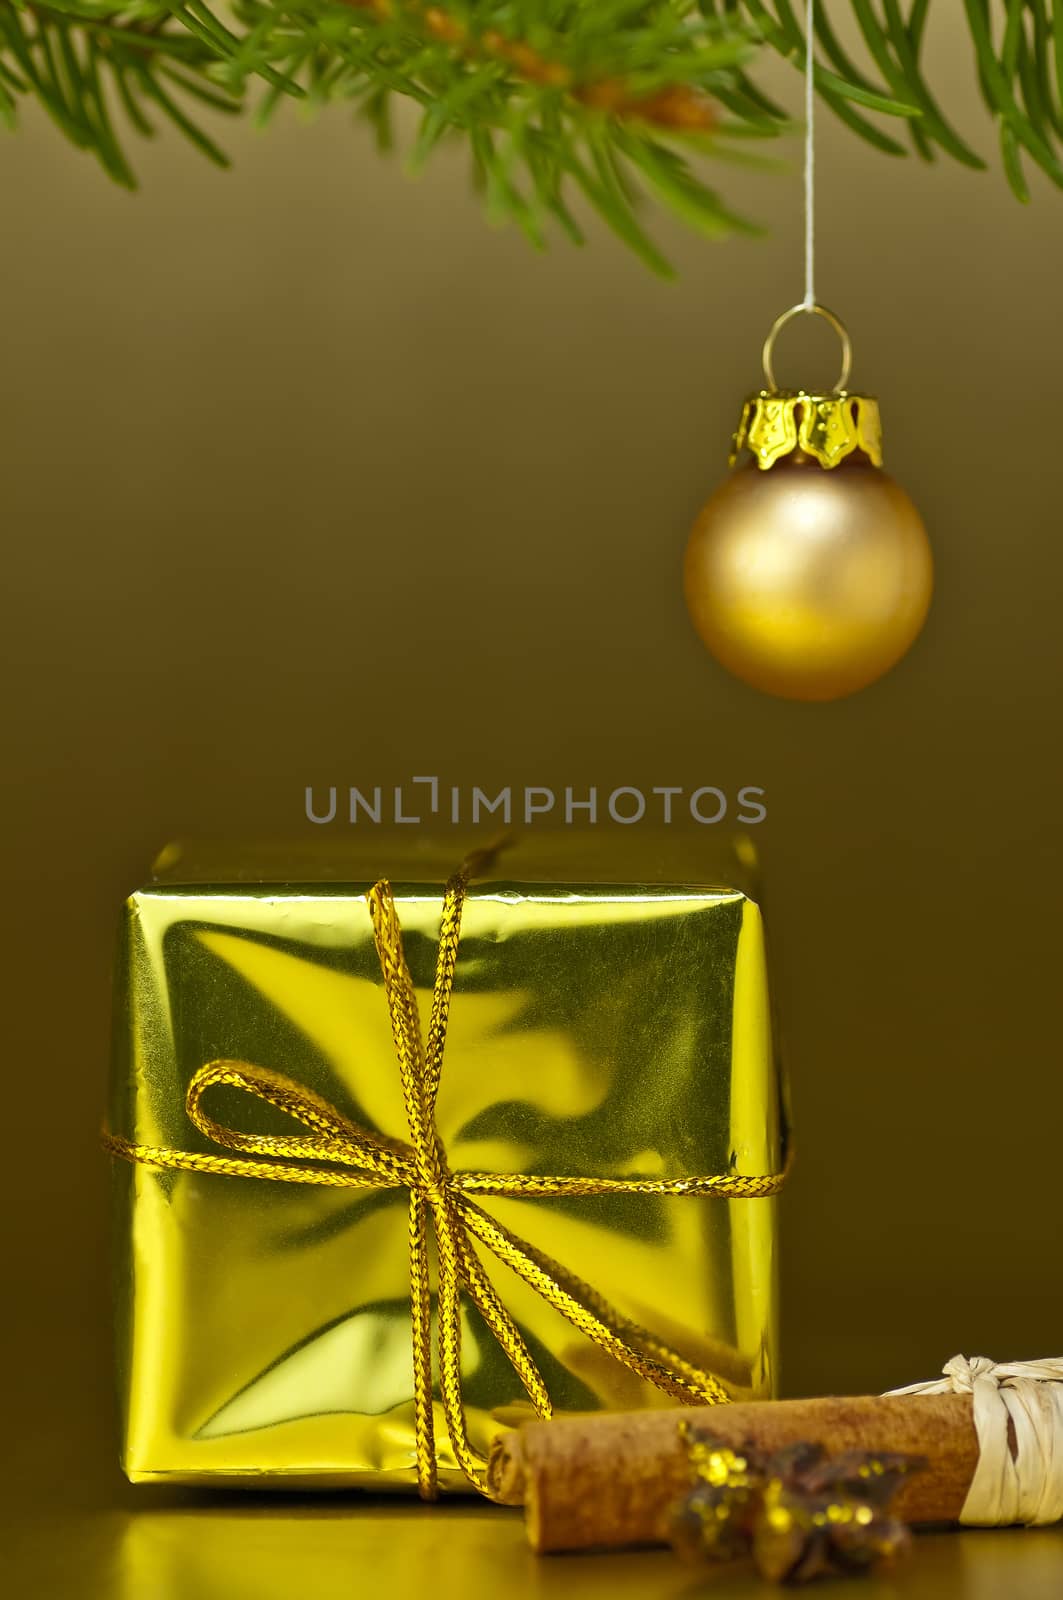 gift for christmas by Jochen